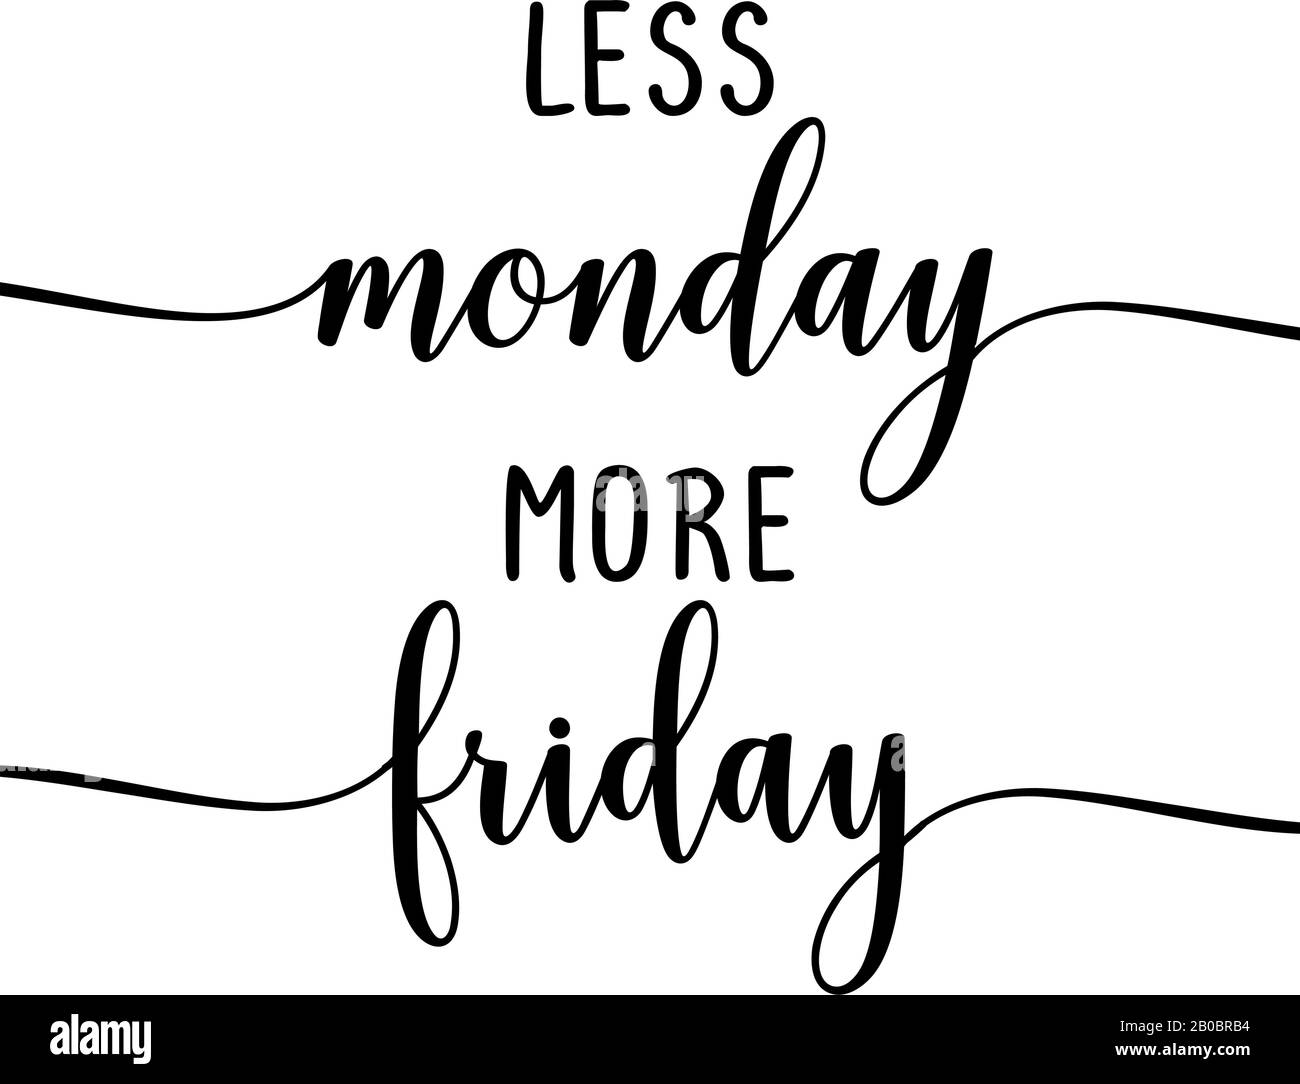 Less monday more friday - slogan. Hand drawn lettering quote ...